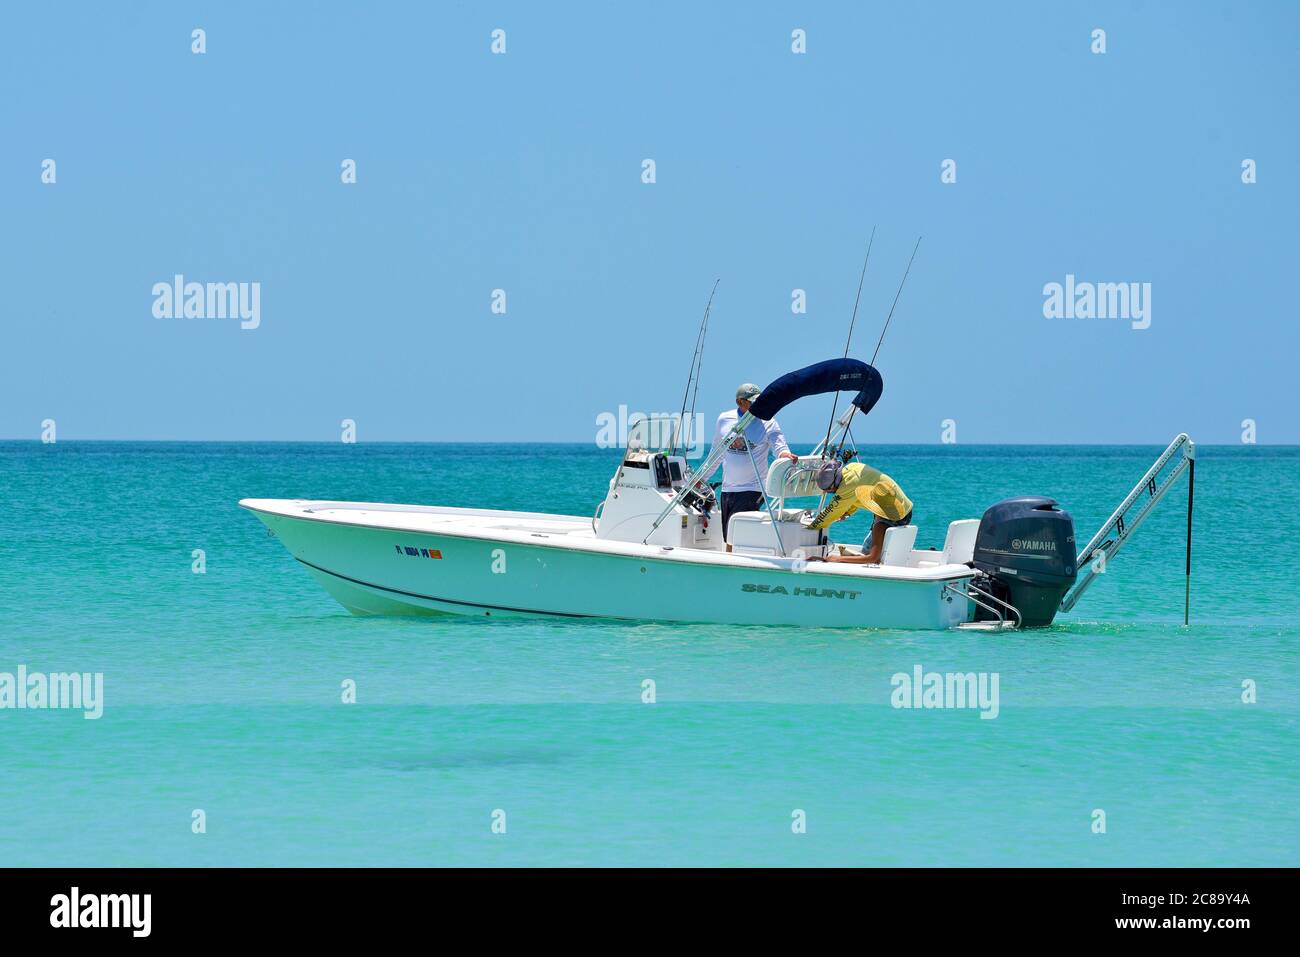 Holmes Beach, Anna Maria Island FL / USA - May 1, 2018: People Fishing from a Power Boat in the Gulf of Mexico Stock Photo